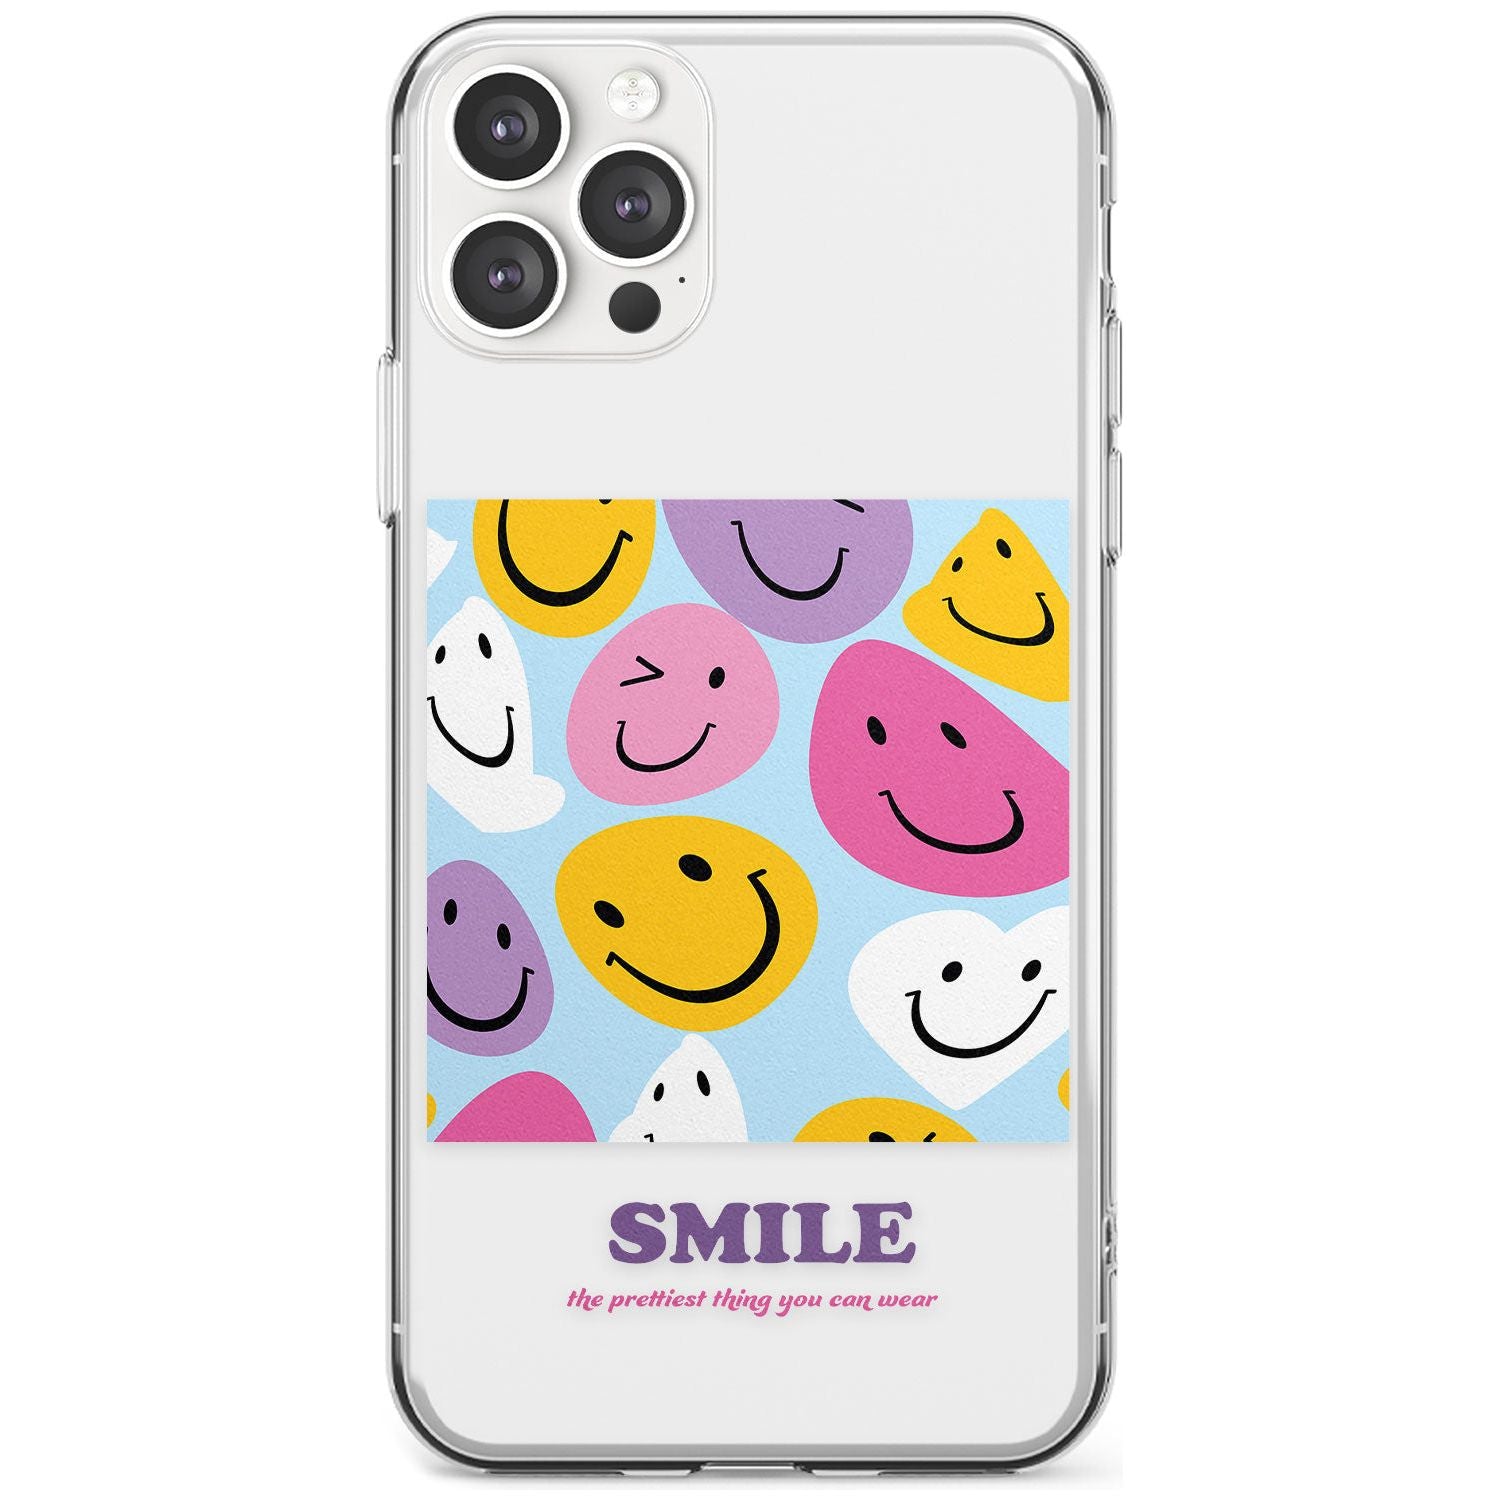 A Smile Slim TPU Phone Case for iPhone 11 Pro Max